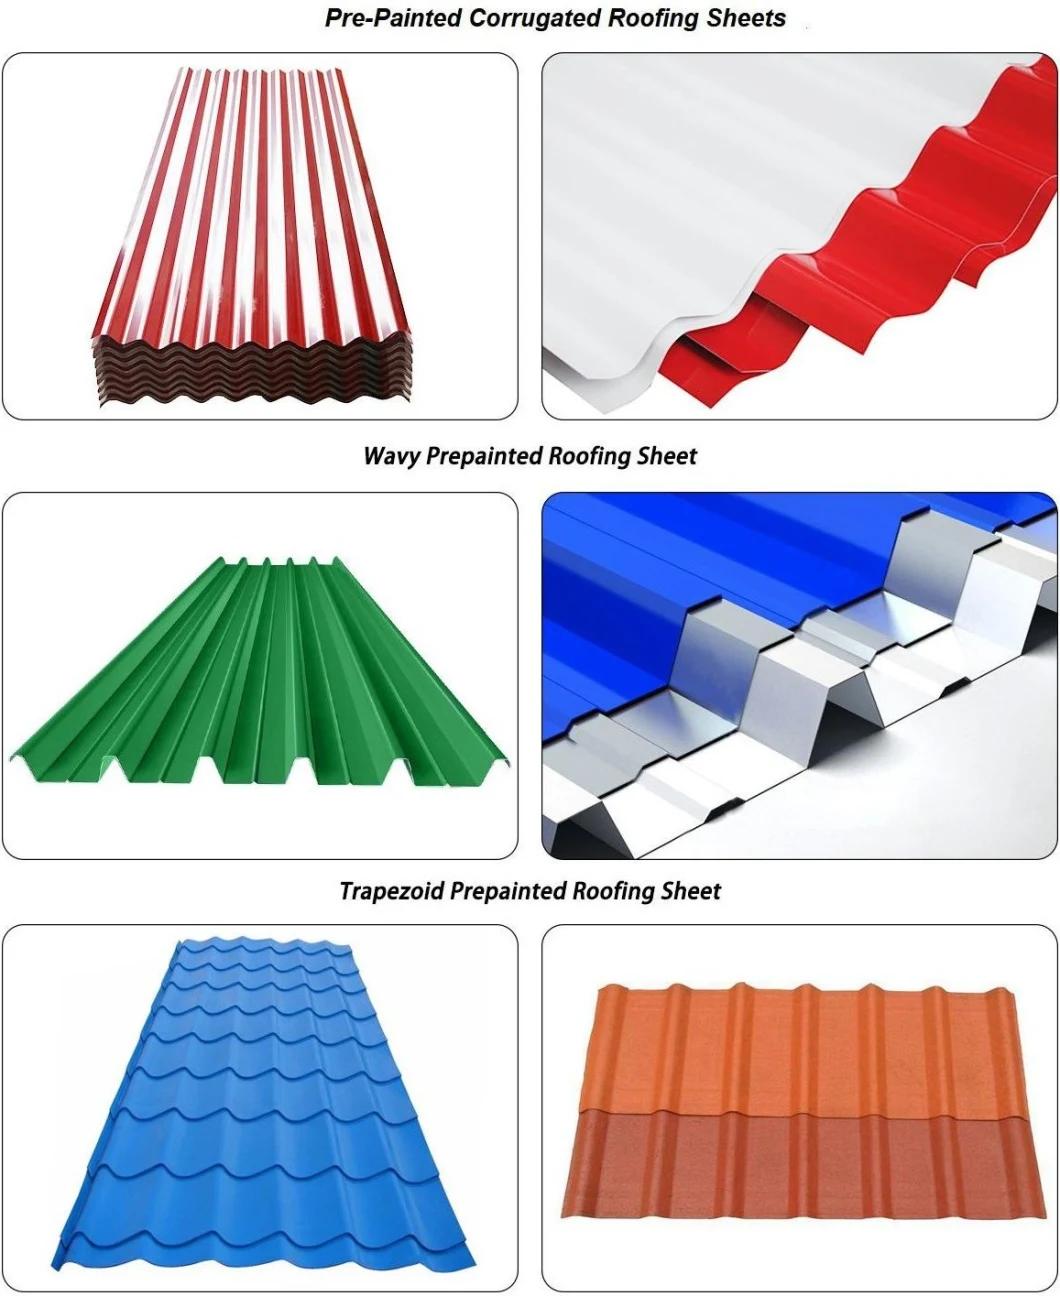 Good Service AISI ASTM 0.12-2.0mm*600-1250mm Metal Roof Tiles Corrugated Steel Roofing Sheet